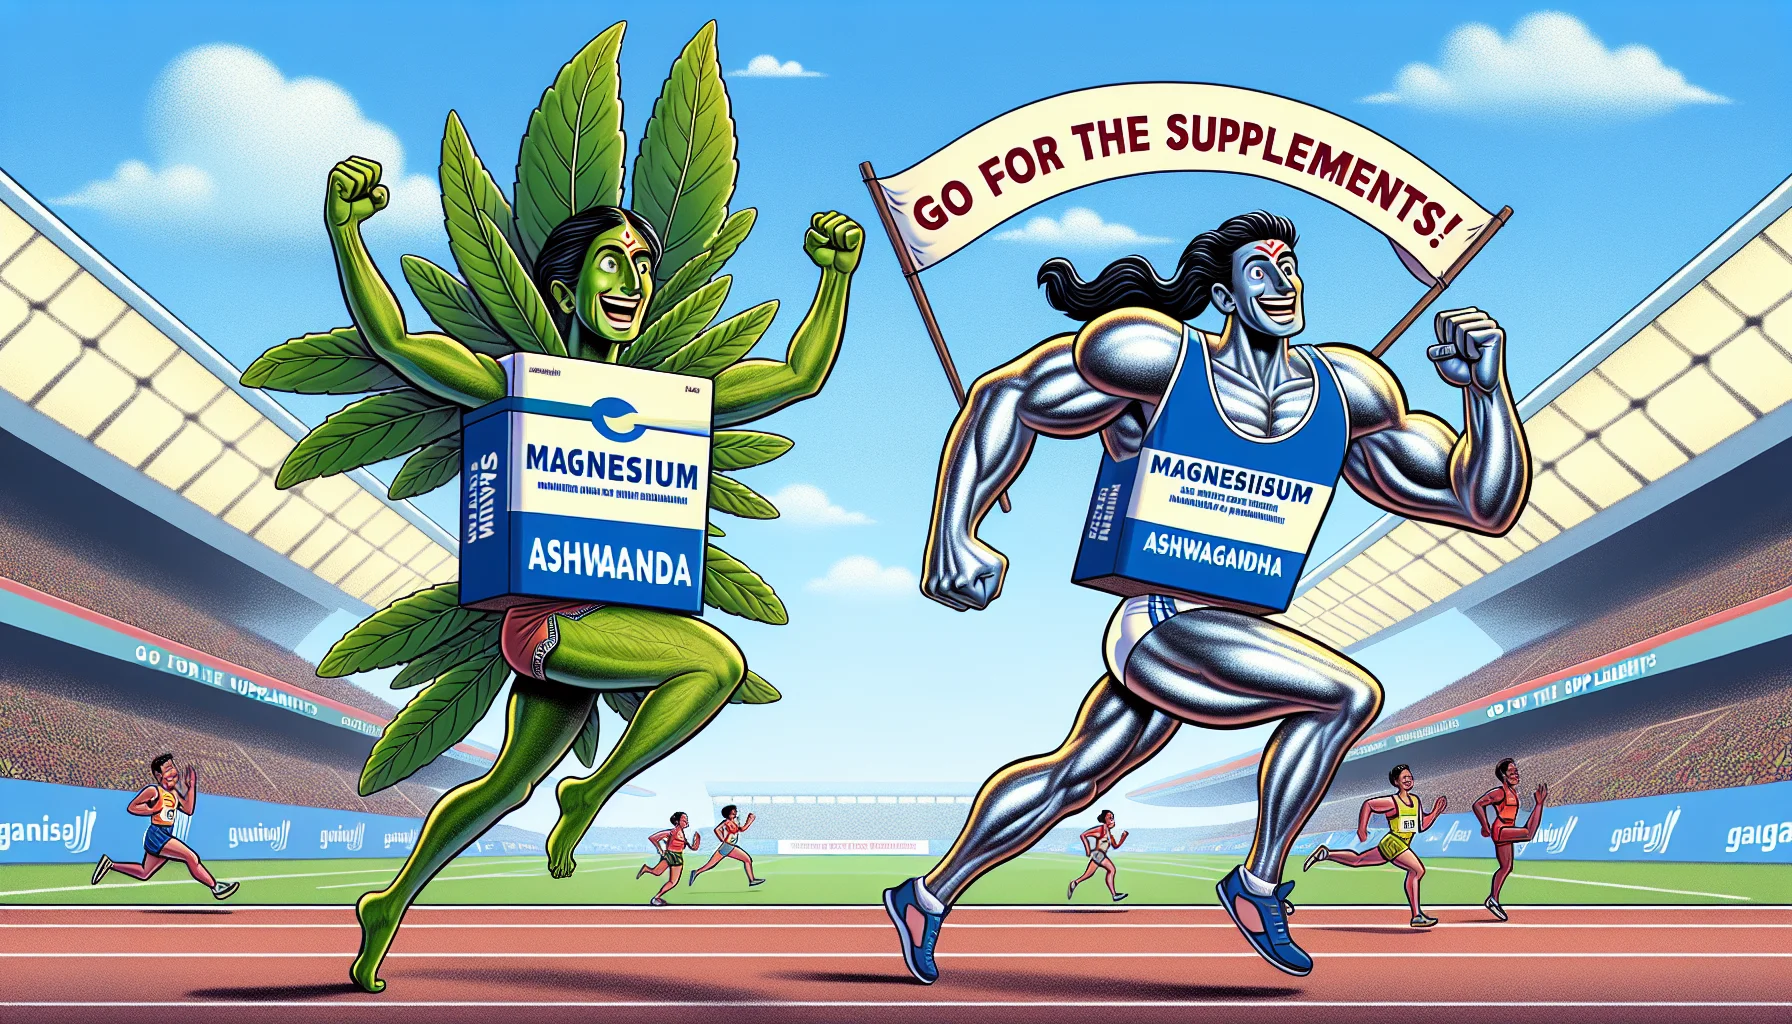 A lively and humorous scenario featuring a sports setting, with magnesium and ashwagandha in anthropomorphic forms. The ashwagandha, a leafy herb, is elegantly turned into an agile female athlete of South Asian descent, while the magnesium, envisioned as a glistening block, is molded into a masculine well-built athlete of Caucasian descent. They're competing in a friendly marathon race, each showing determination and vigor. The background is adorned with encouraging banners such as 'Go for the Supplements!'. The overall mood is light-hearted, depicting the positive effects of these supplements in sports.